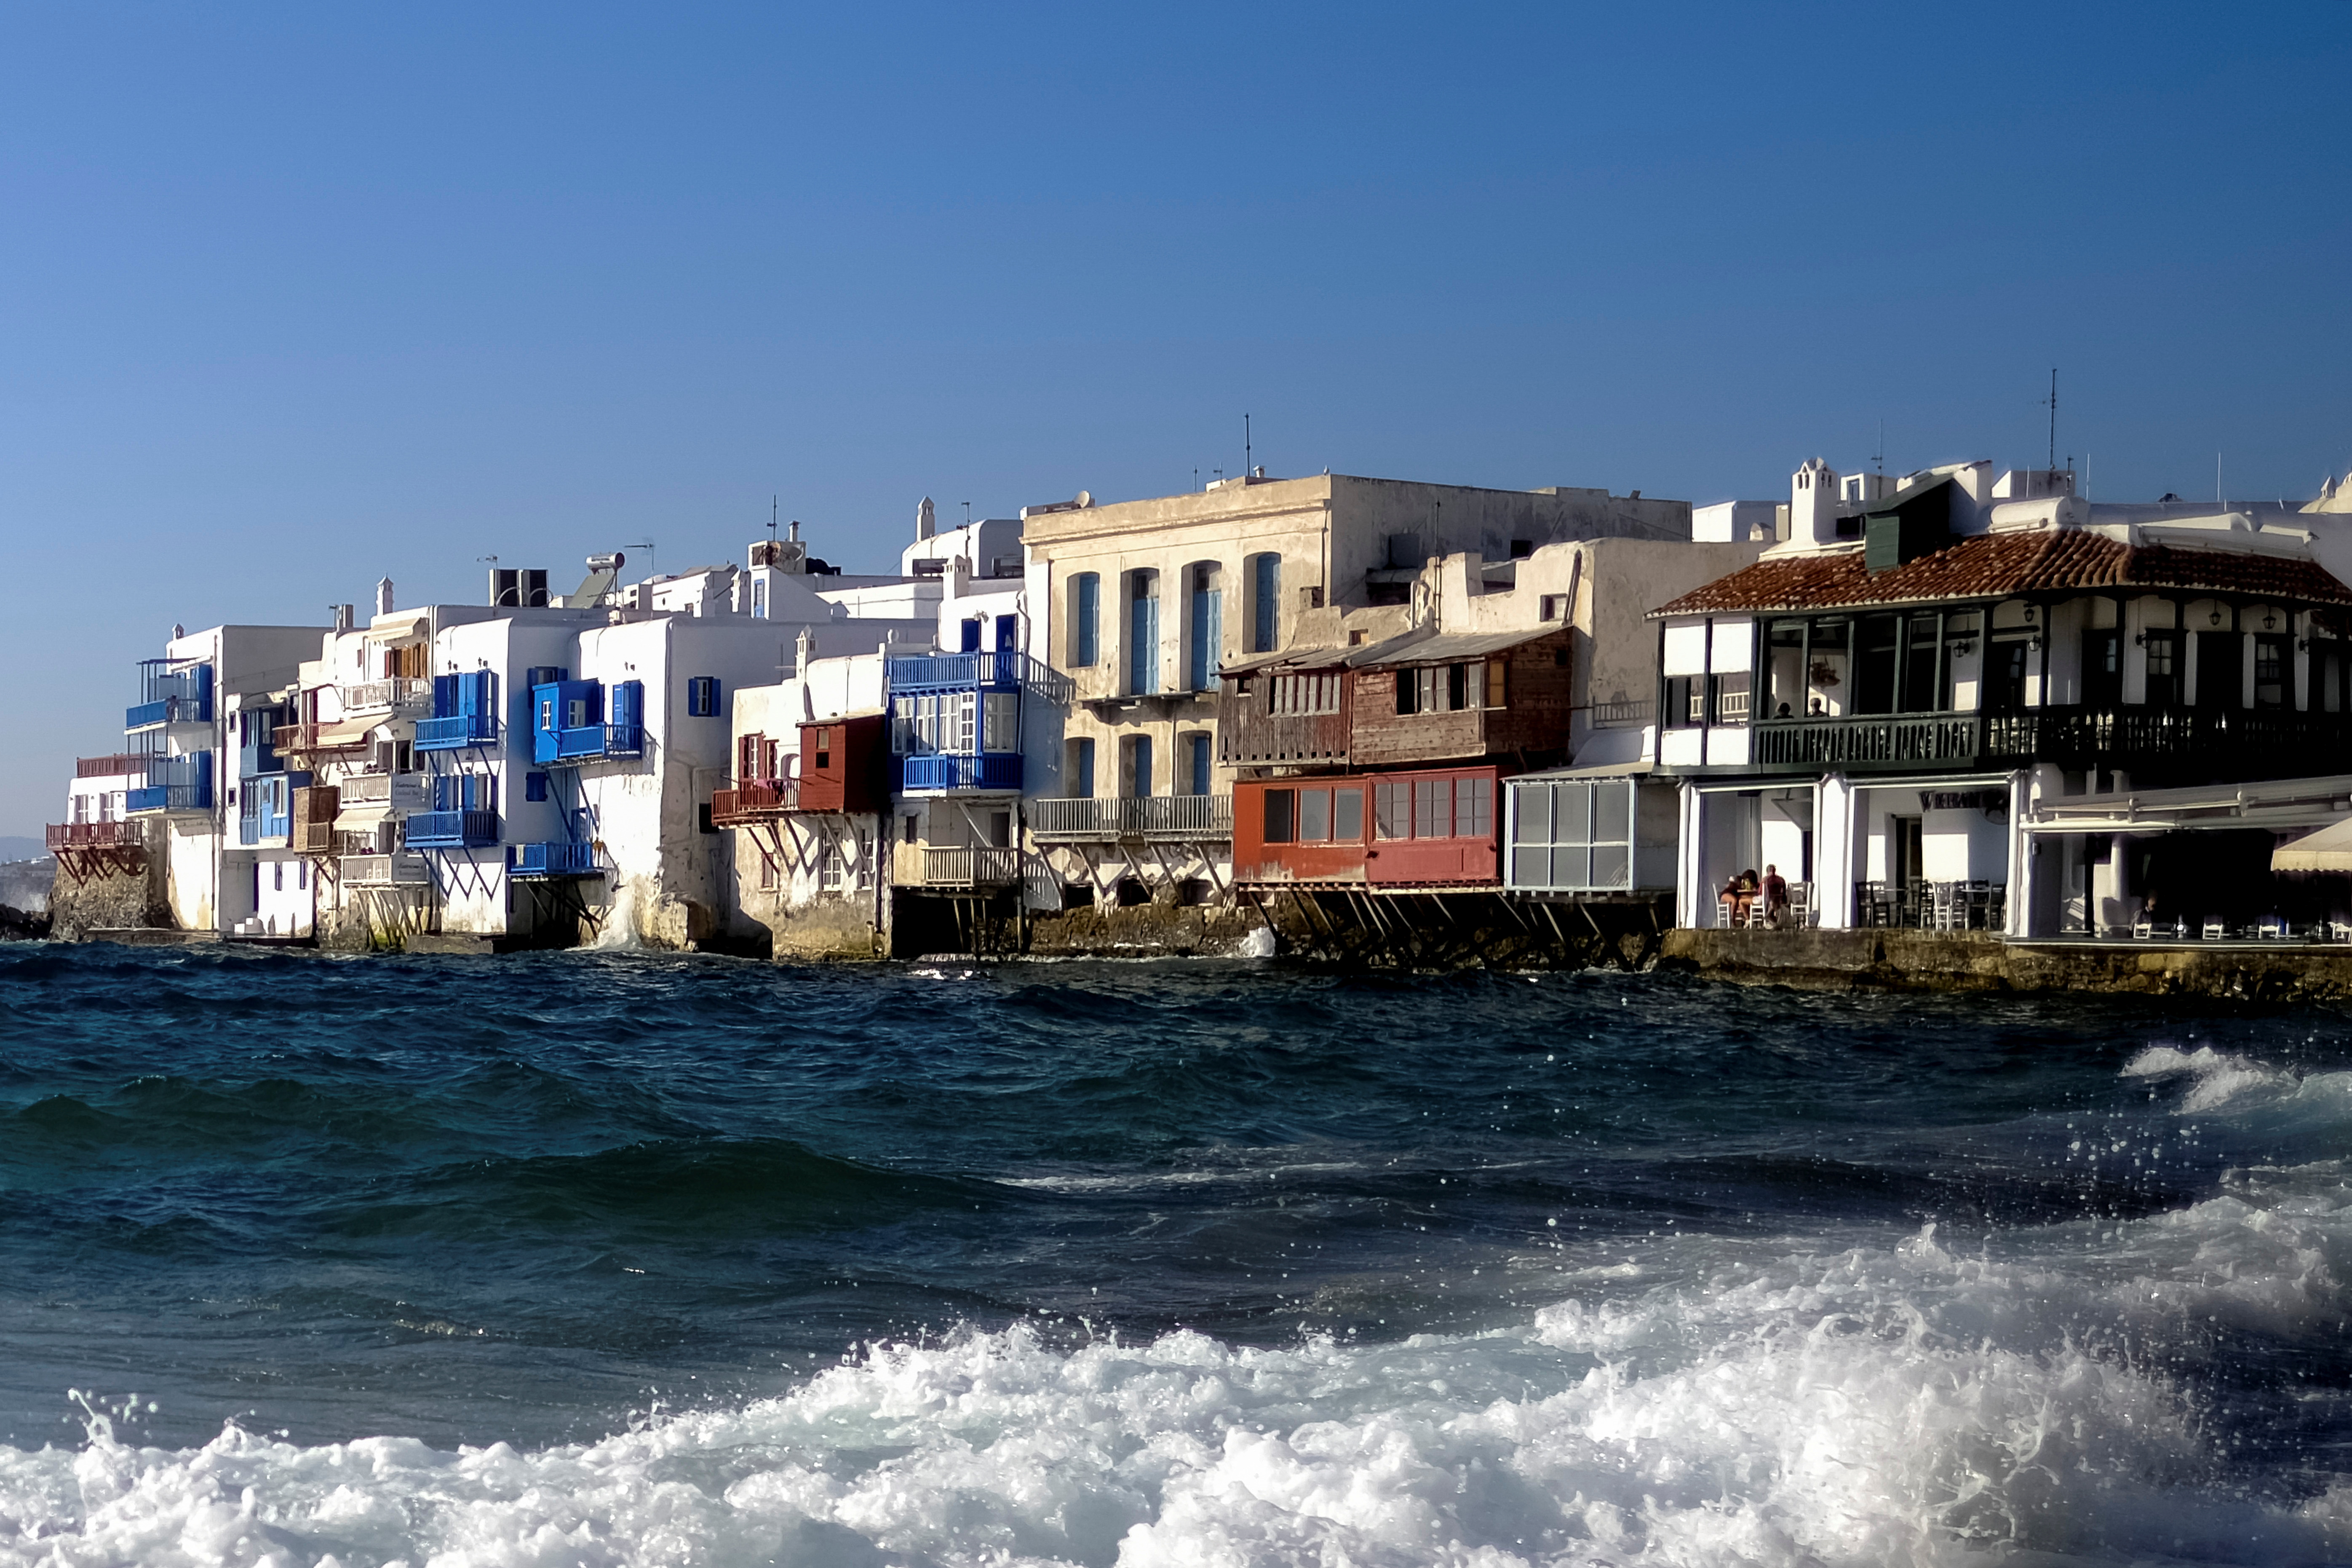 A view of Little Venice on the island of Mykonos